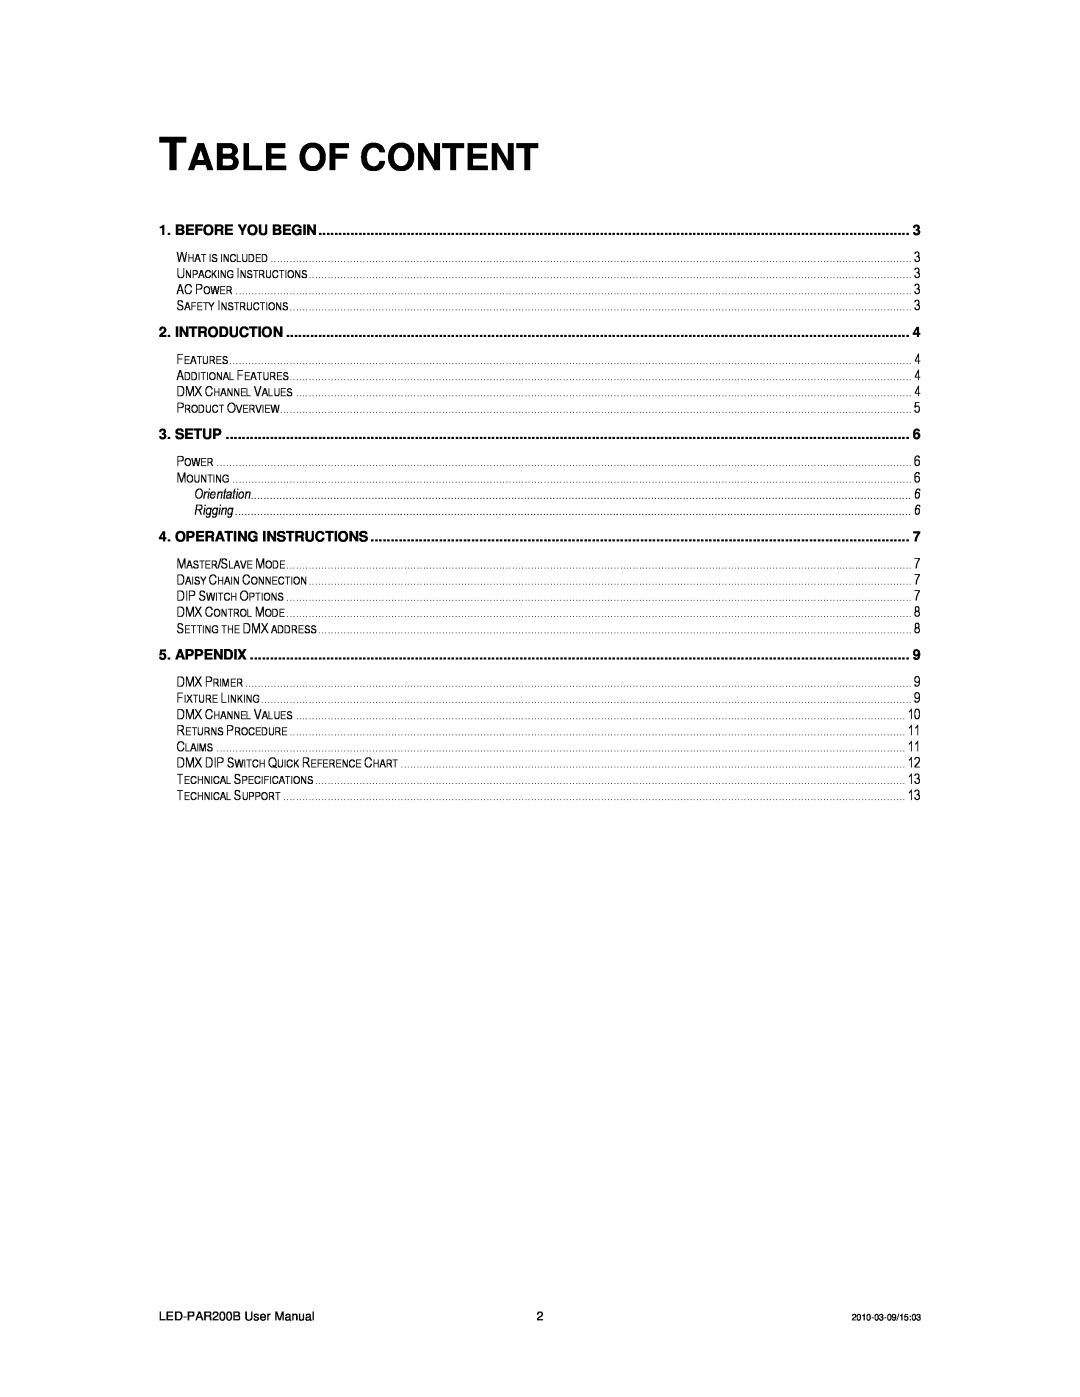 Chauvet 200B user manual Table Of Content, Before You Begin, Introduction, Setup, Operating Instructions, Appendix 